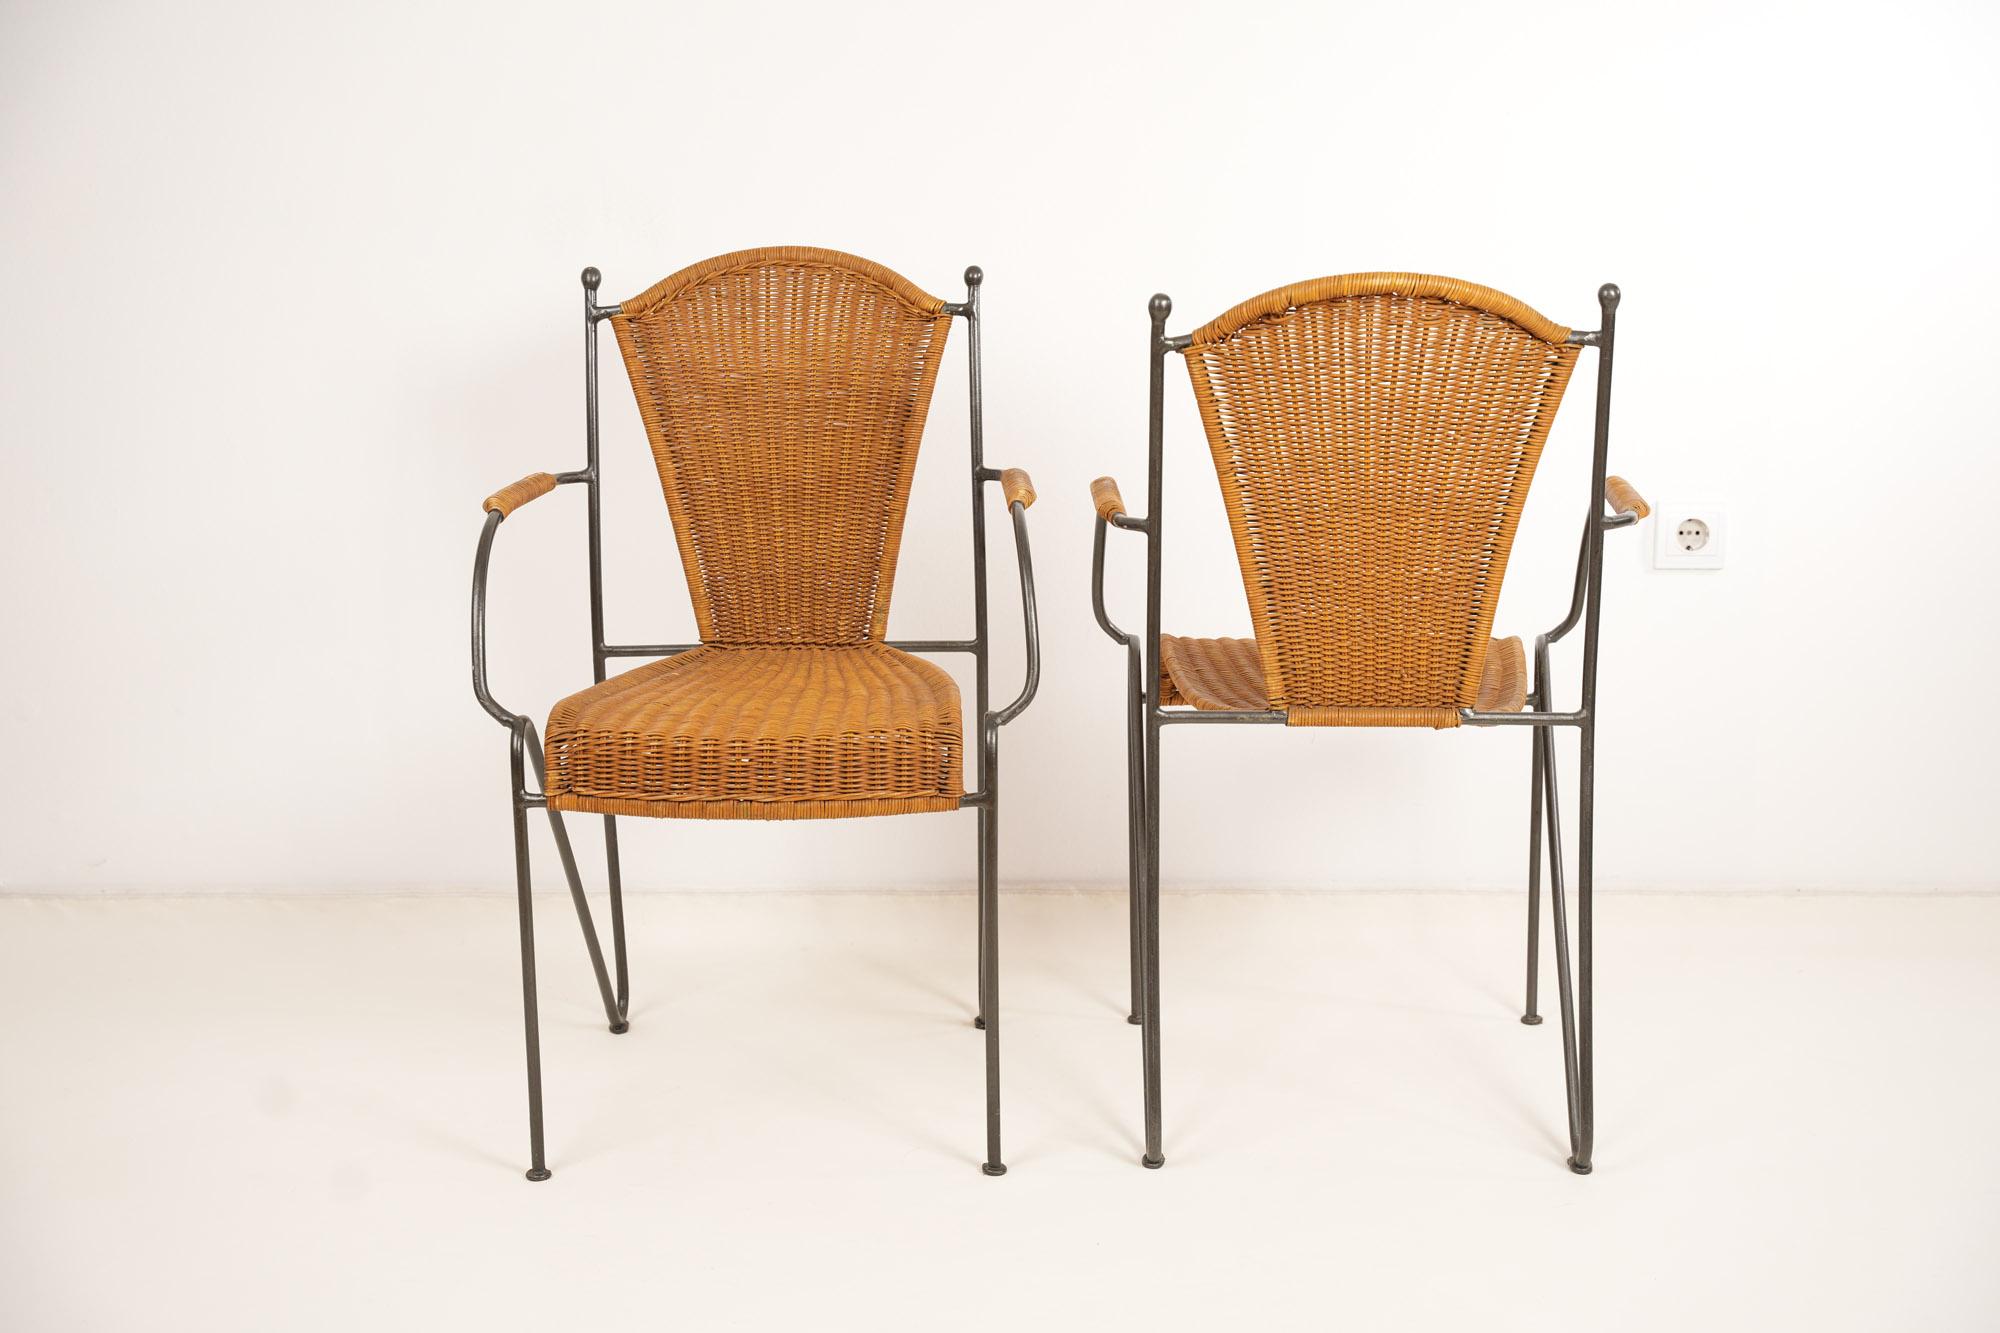 American Set of Four Wicker and Iron Chair By Frederic Weinberg 1950s For Sale